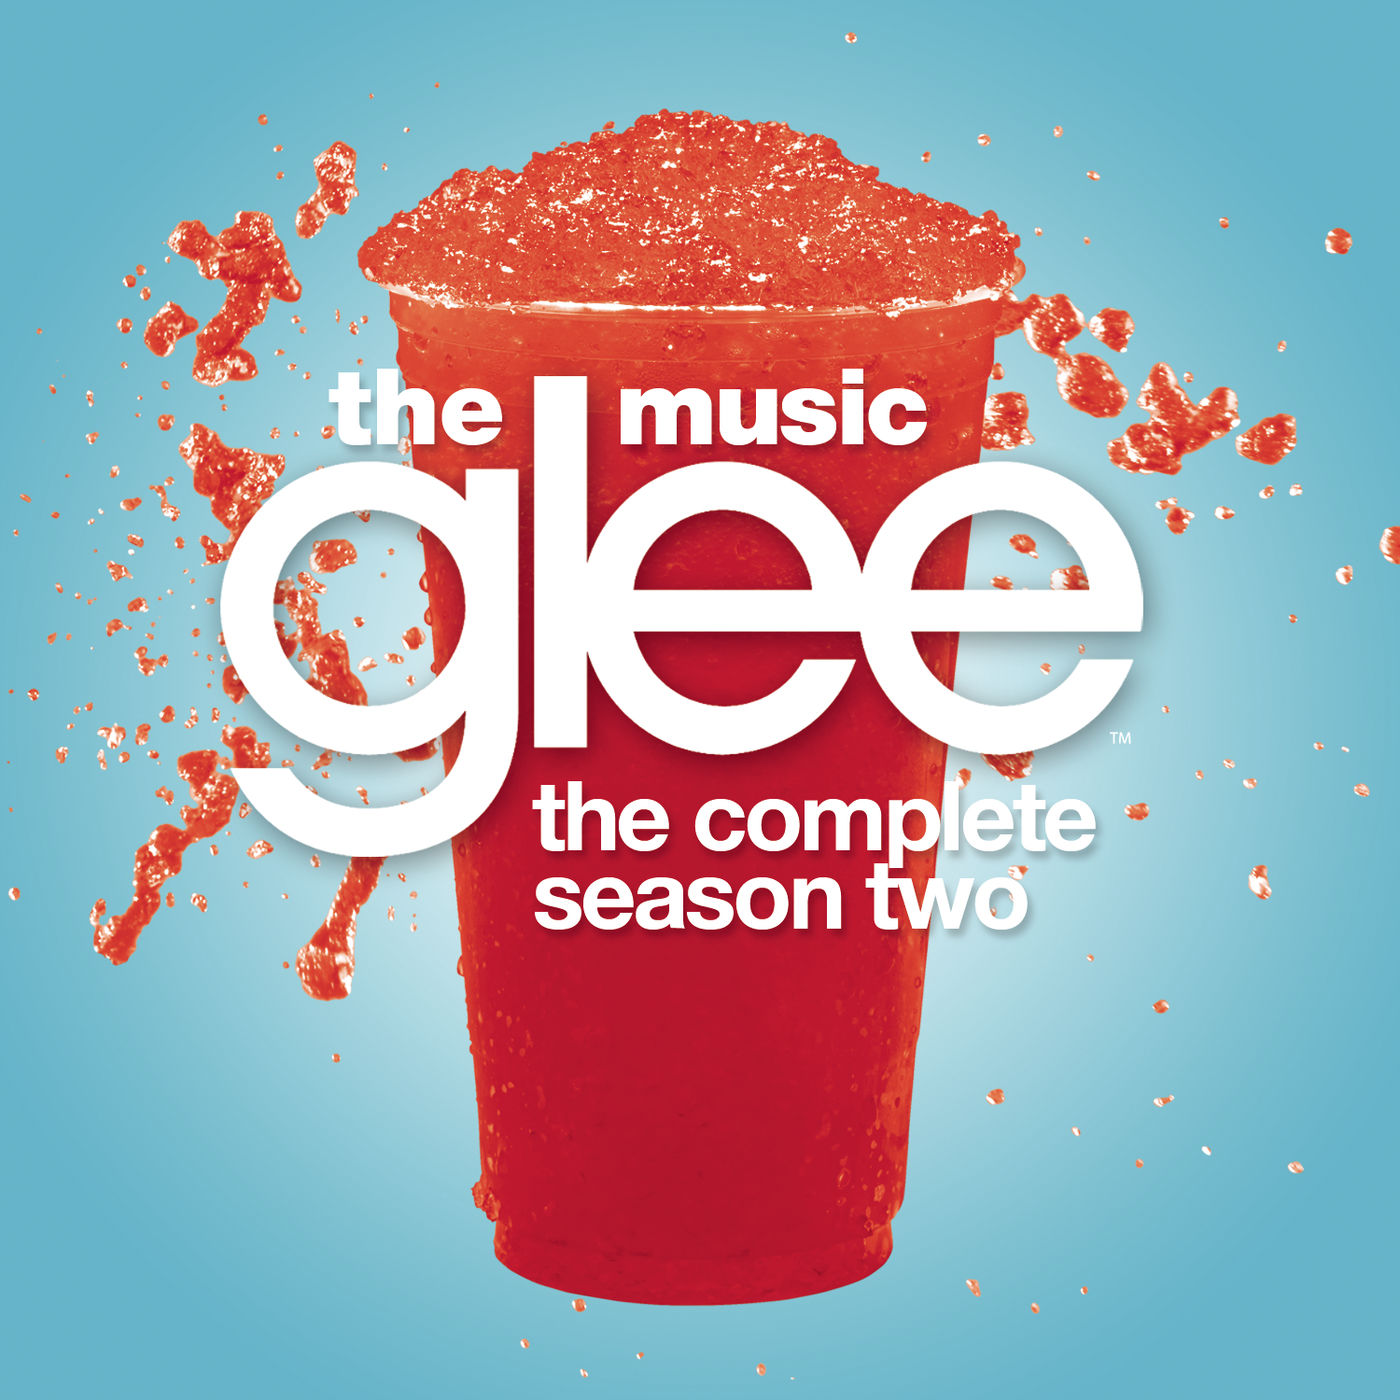 The Music, The Complete Season Two